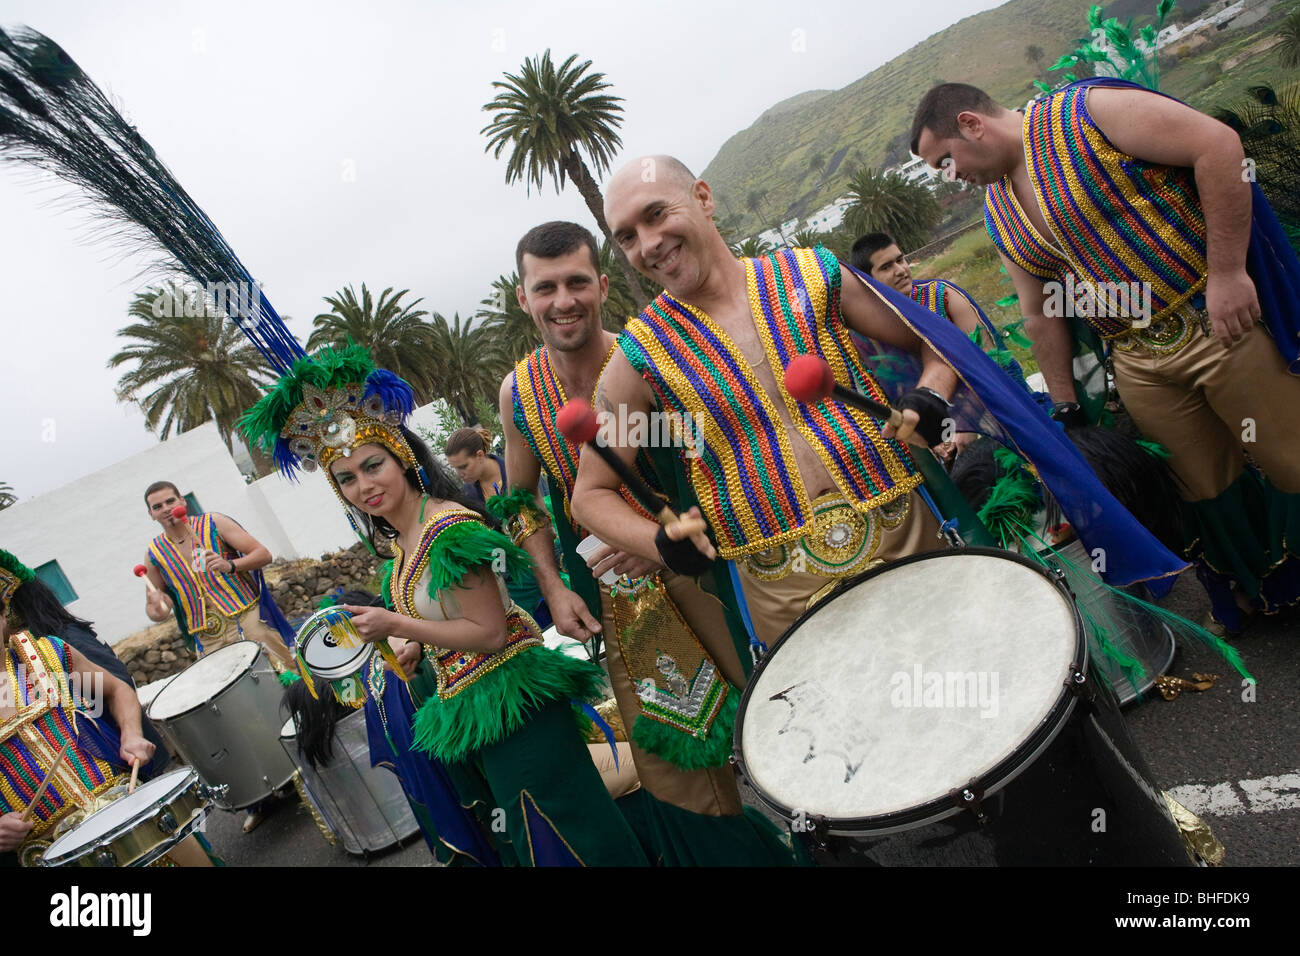 Men playing drums at carnival, dressed in costume, Haria, Lanzarote, Canary Islands, Spain, Europe Stock Photo